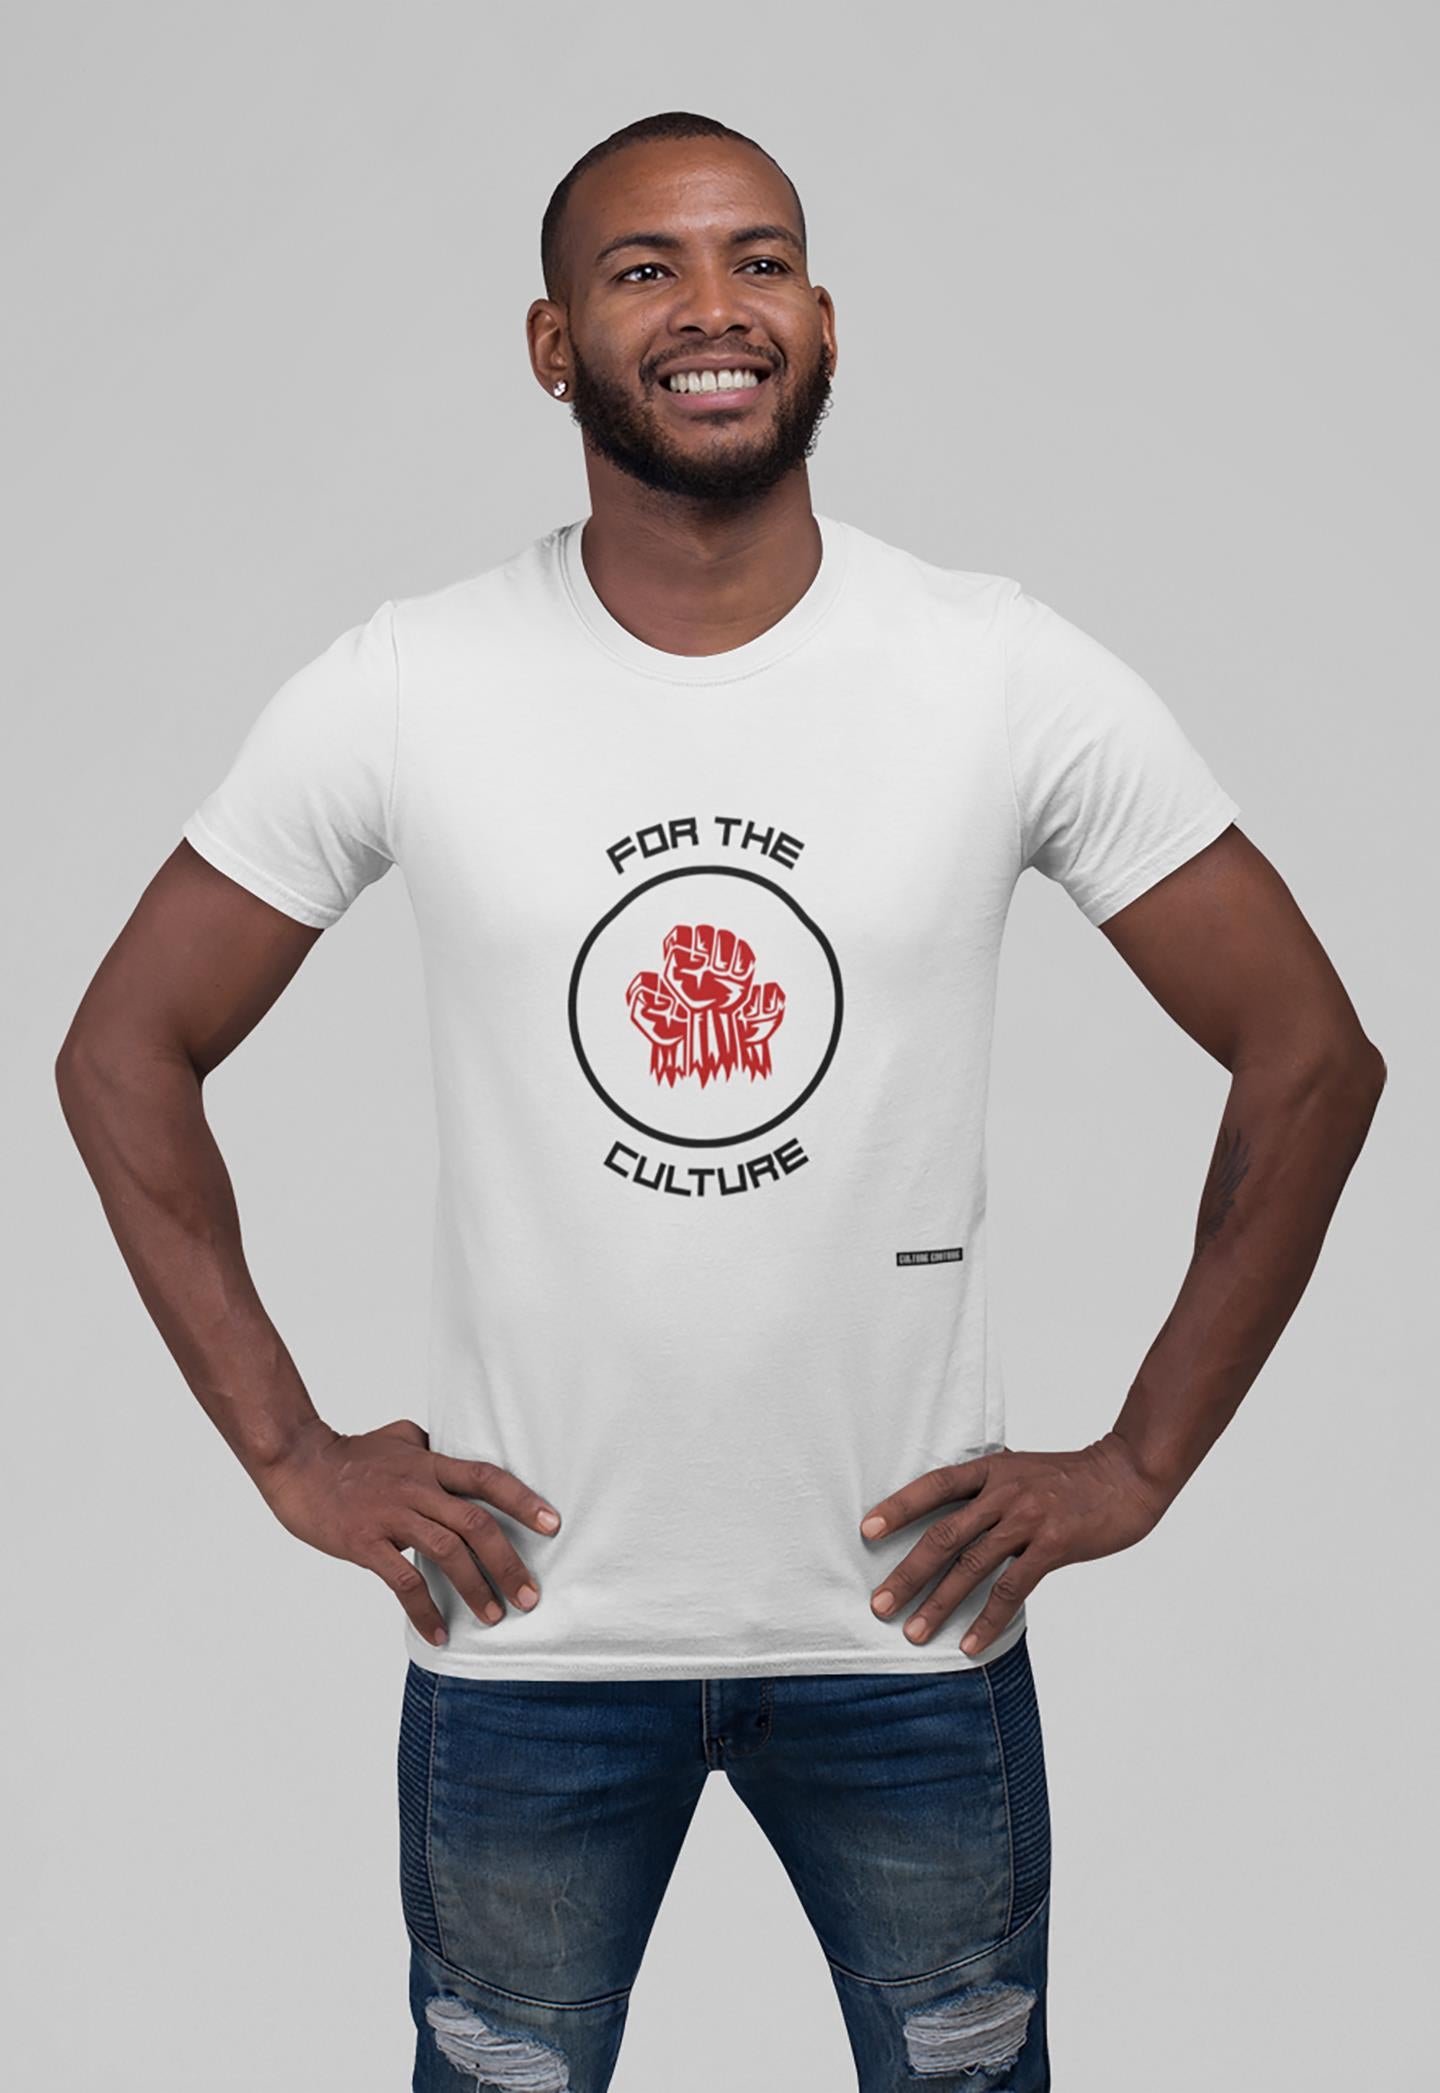 For The Culture T-Shirt/White/Black/Red